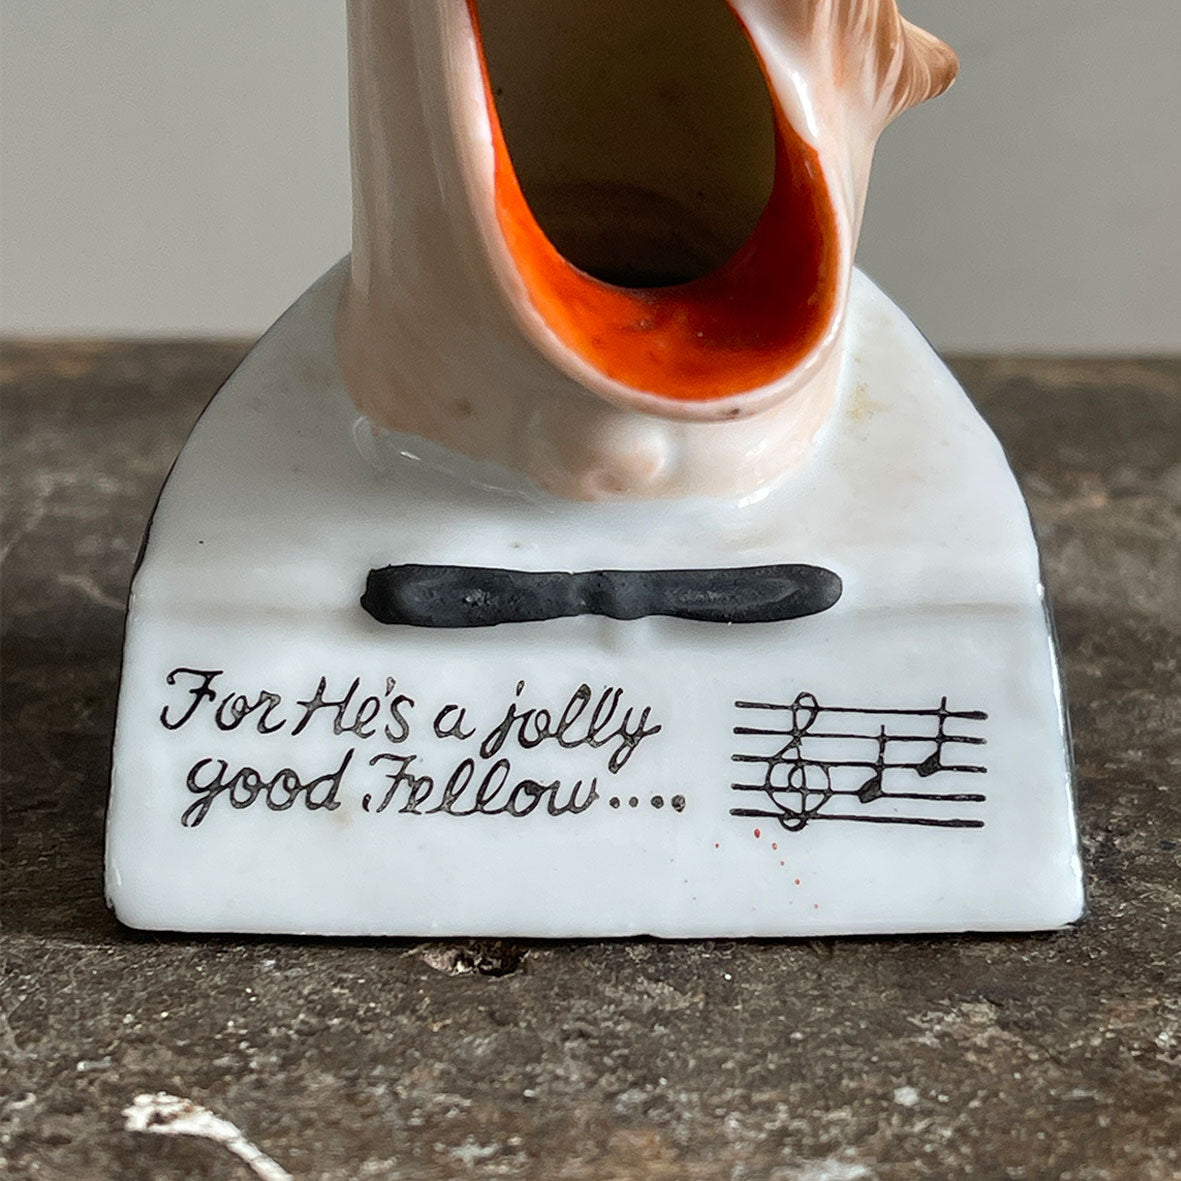 A rare German Porcelain Smoking Ashtray by Schafer &amp; Vater. These unusual objects were used as ashtrays with the smoke of the cigarette escaping through the ear holes. This one sees an old ugly chap with a monocle and a title that reads 'For He's a jolly good fellow - SHOP NOW - www.intovintage.co.uk